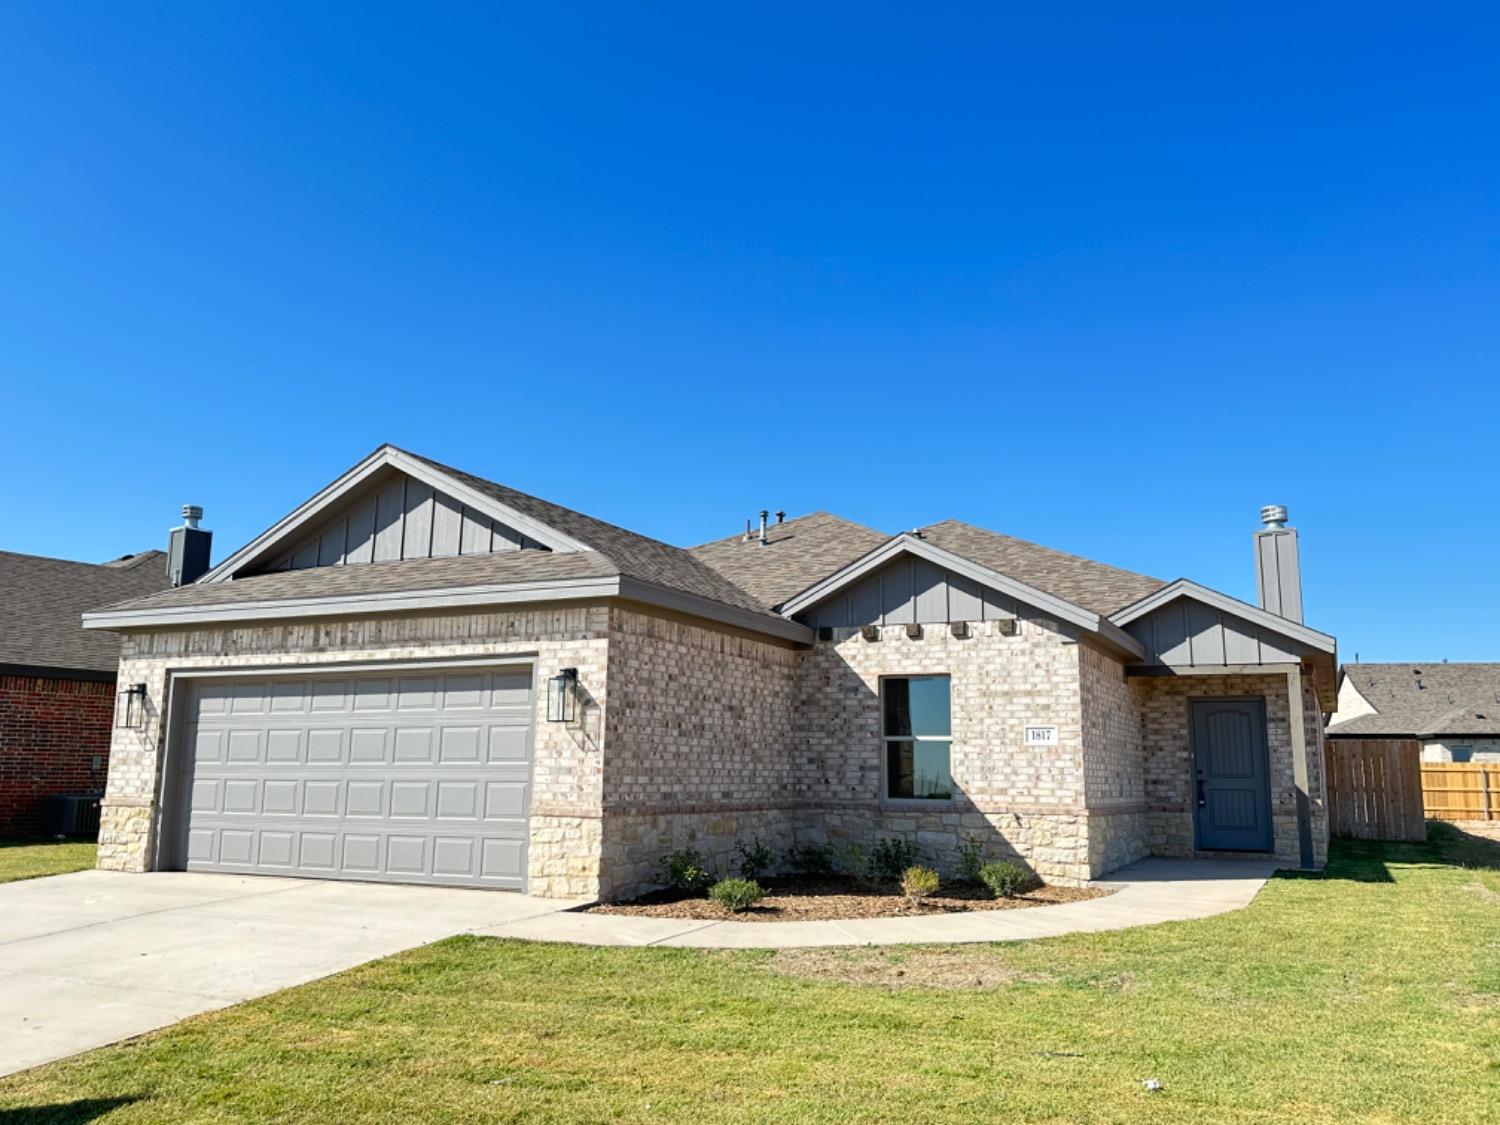 Builder is offering up to $10,000 flex cash! Style meets functionality in this latest new Lubbock Lifetime Home! Situated in Frenship school district, this open concept in The Overlook has everything you are looking for. Four bedrooms, vinyl plank in all the right places, and the spacious backyard are just a few of the amenities that this home has to offer. Come and check it out today!